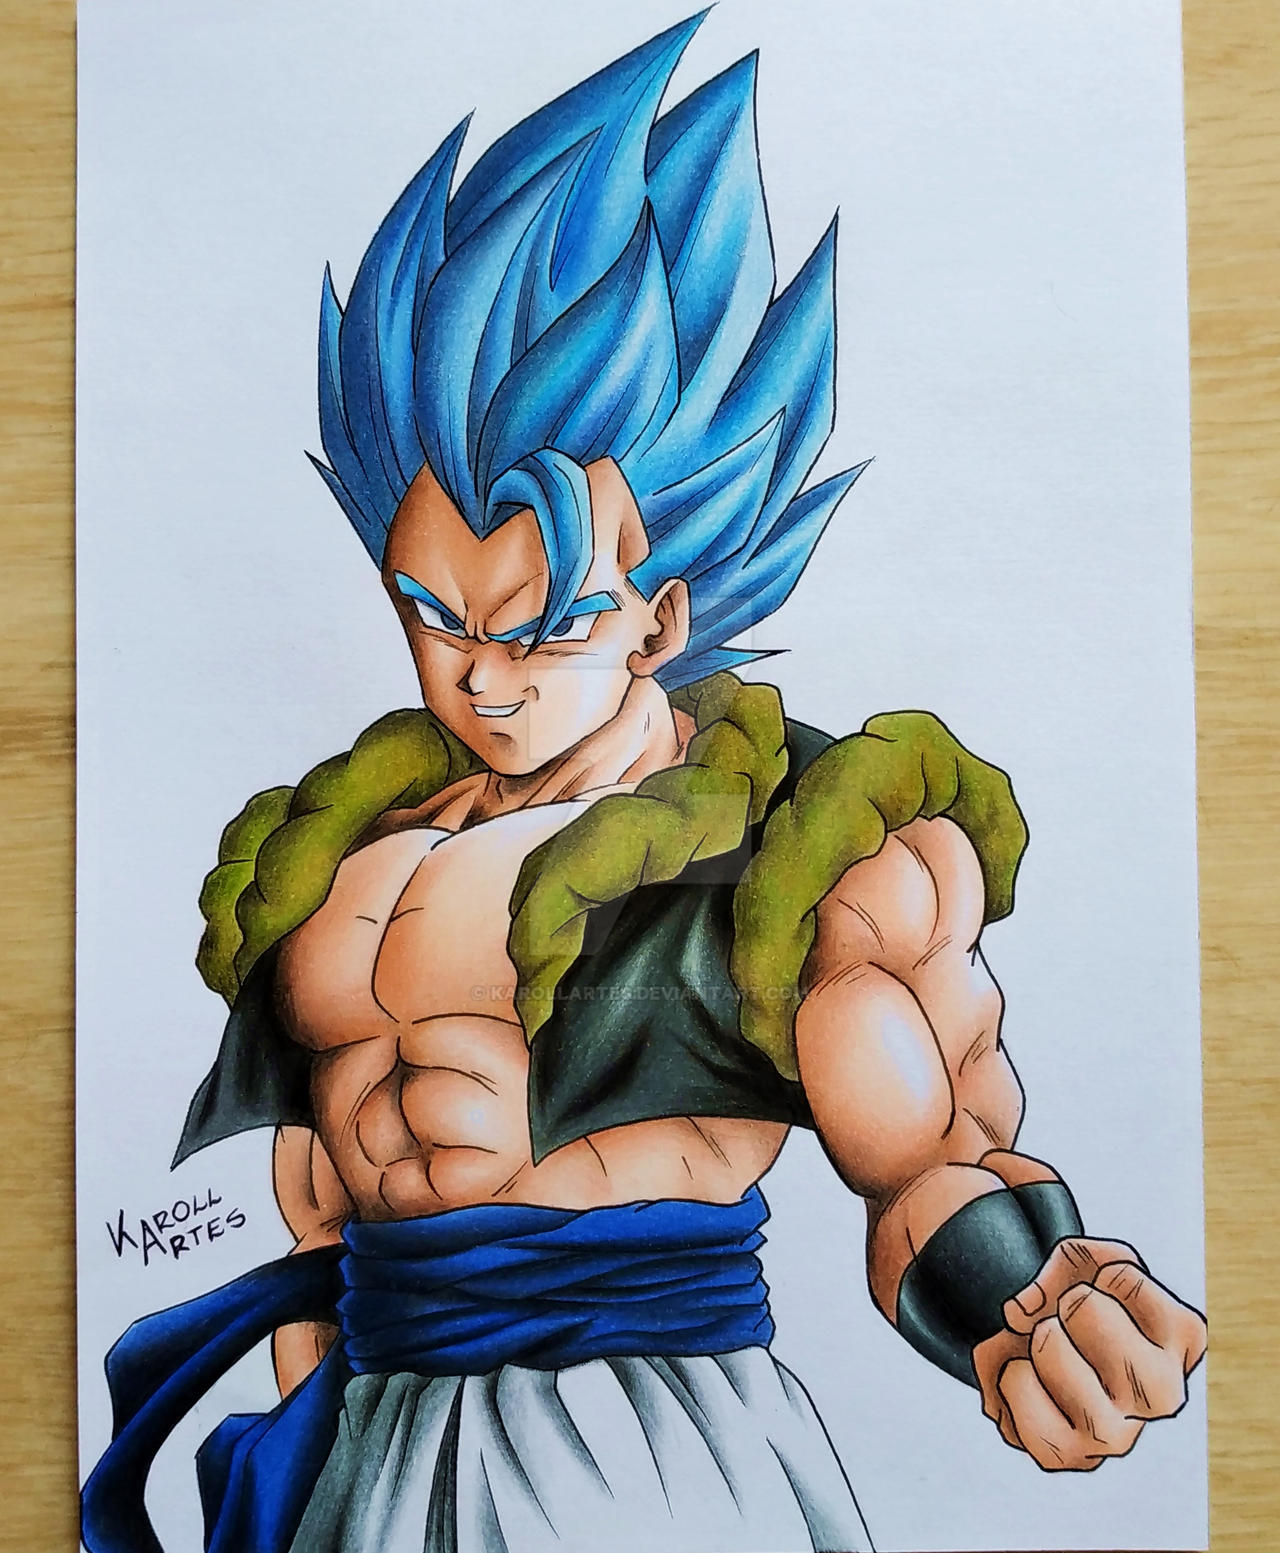 Drawing gogeta godly aura of the ultimate fusion warrior from dragon ball s...